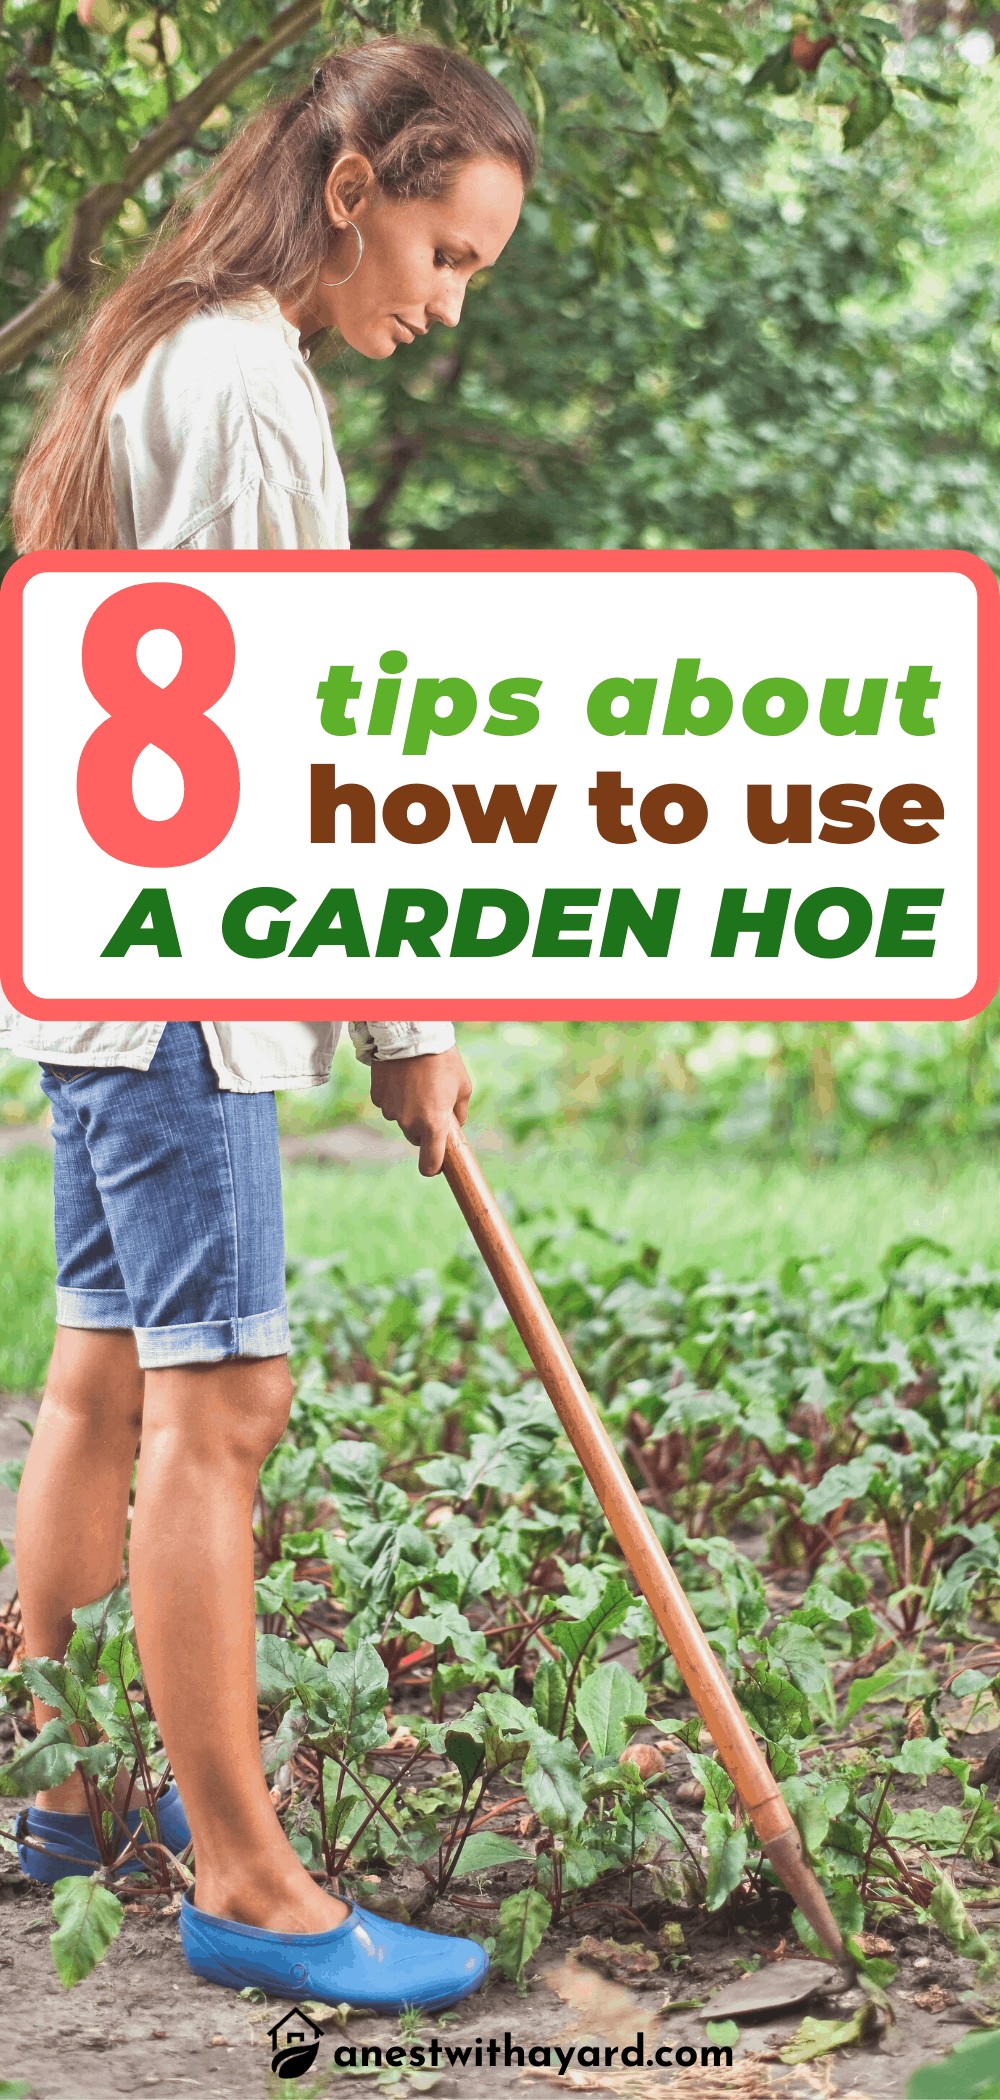 8 Tips on How to Use a Garden Hoe 2